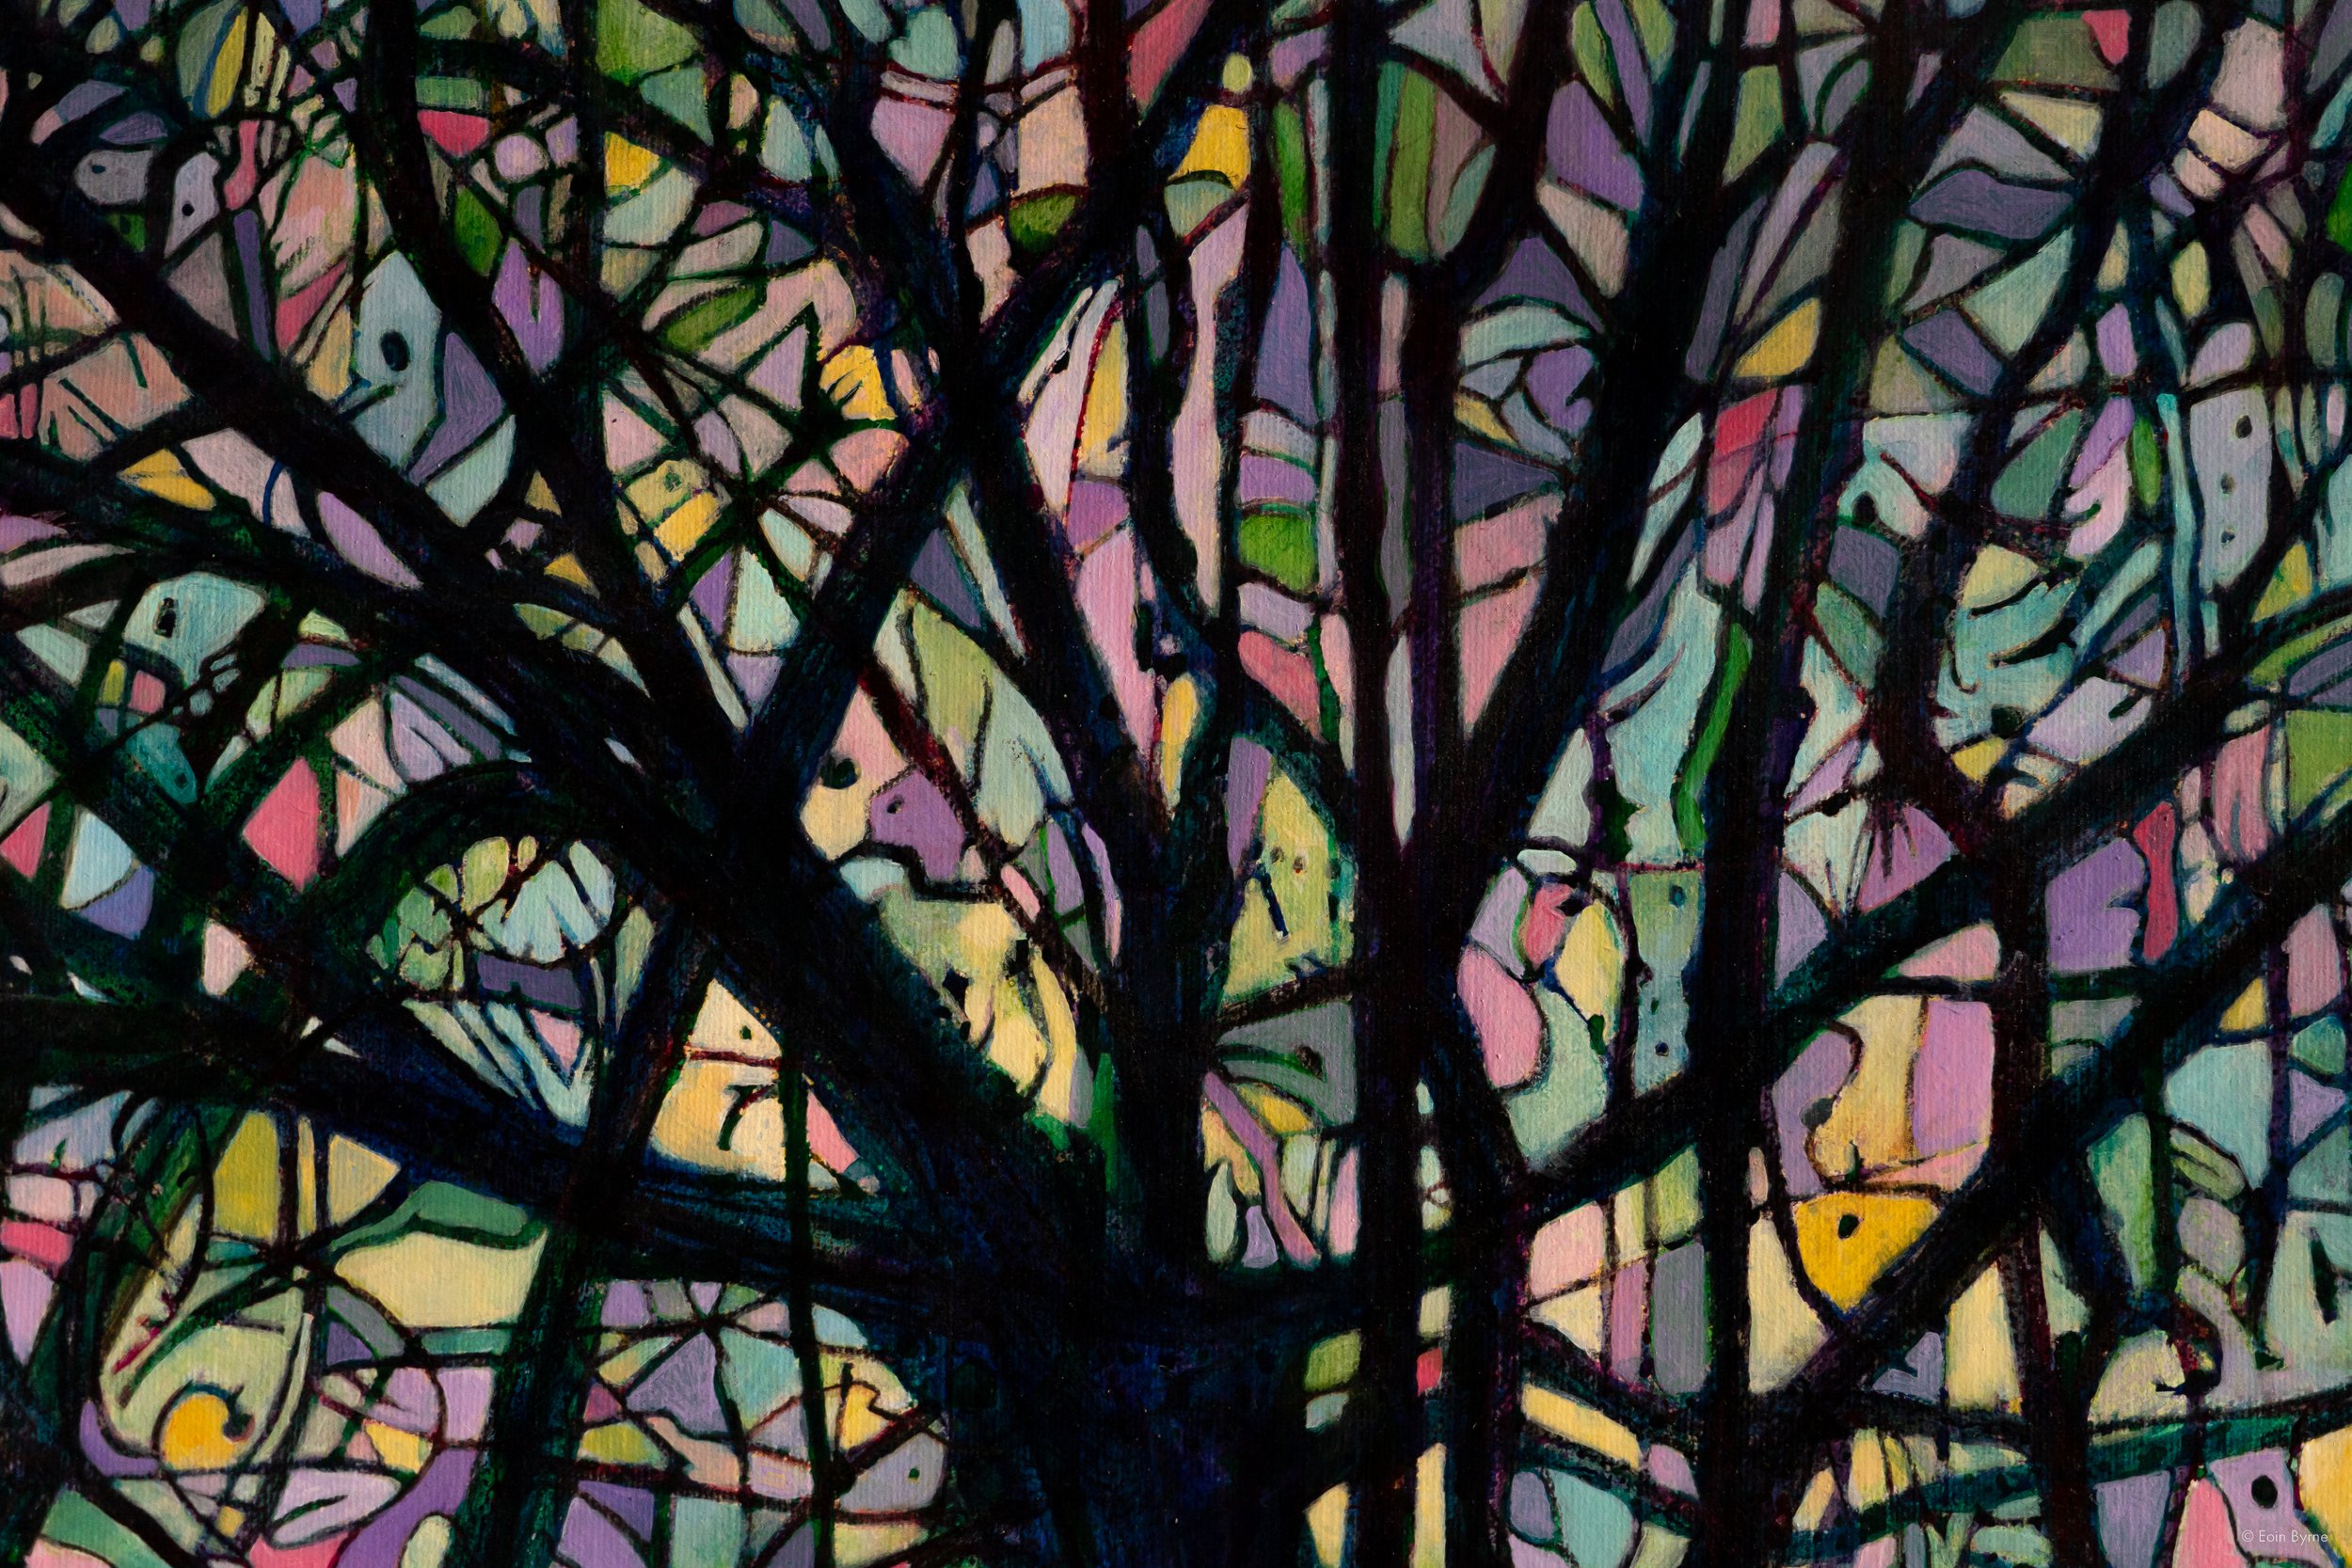 "Looking up through trees" (detail 3)